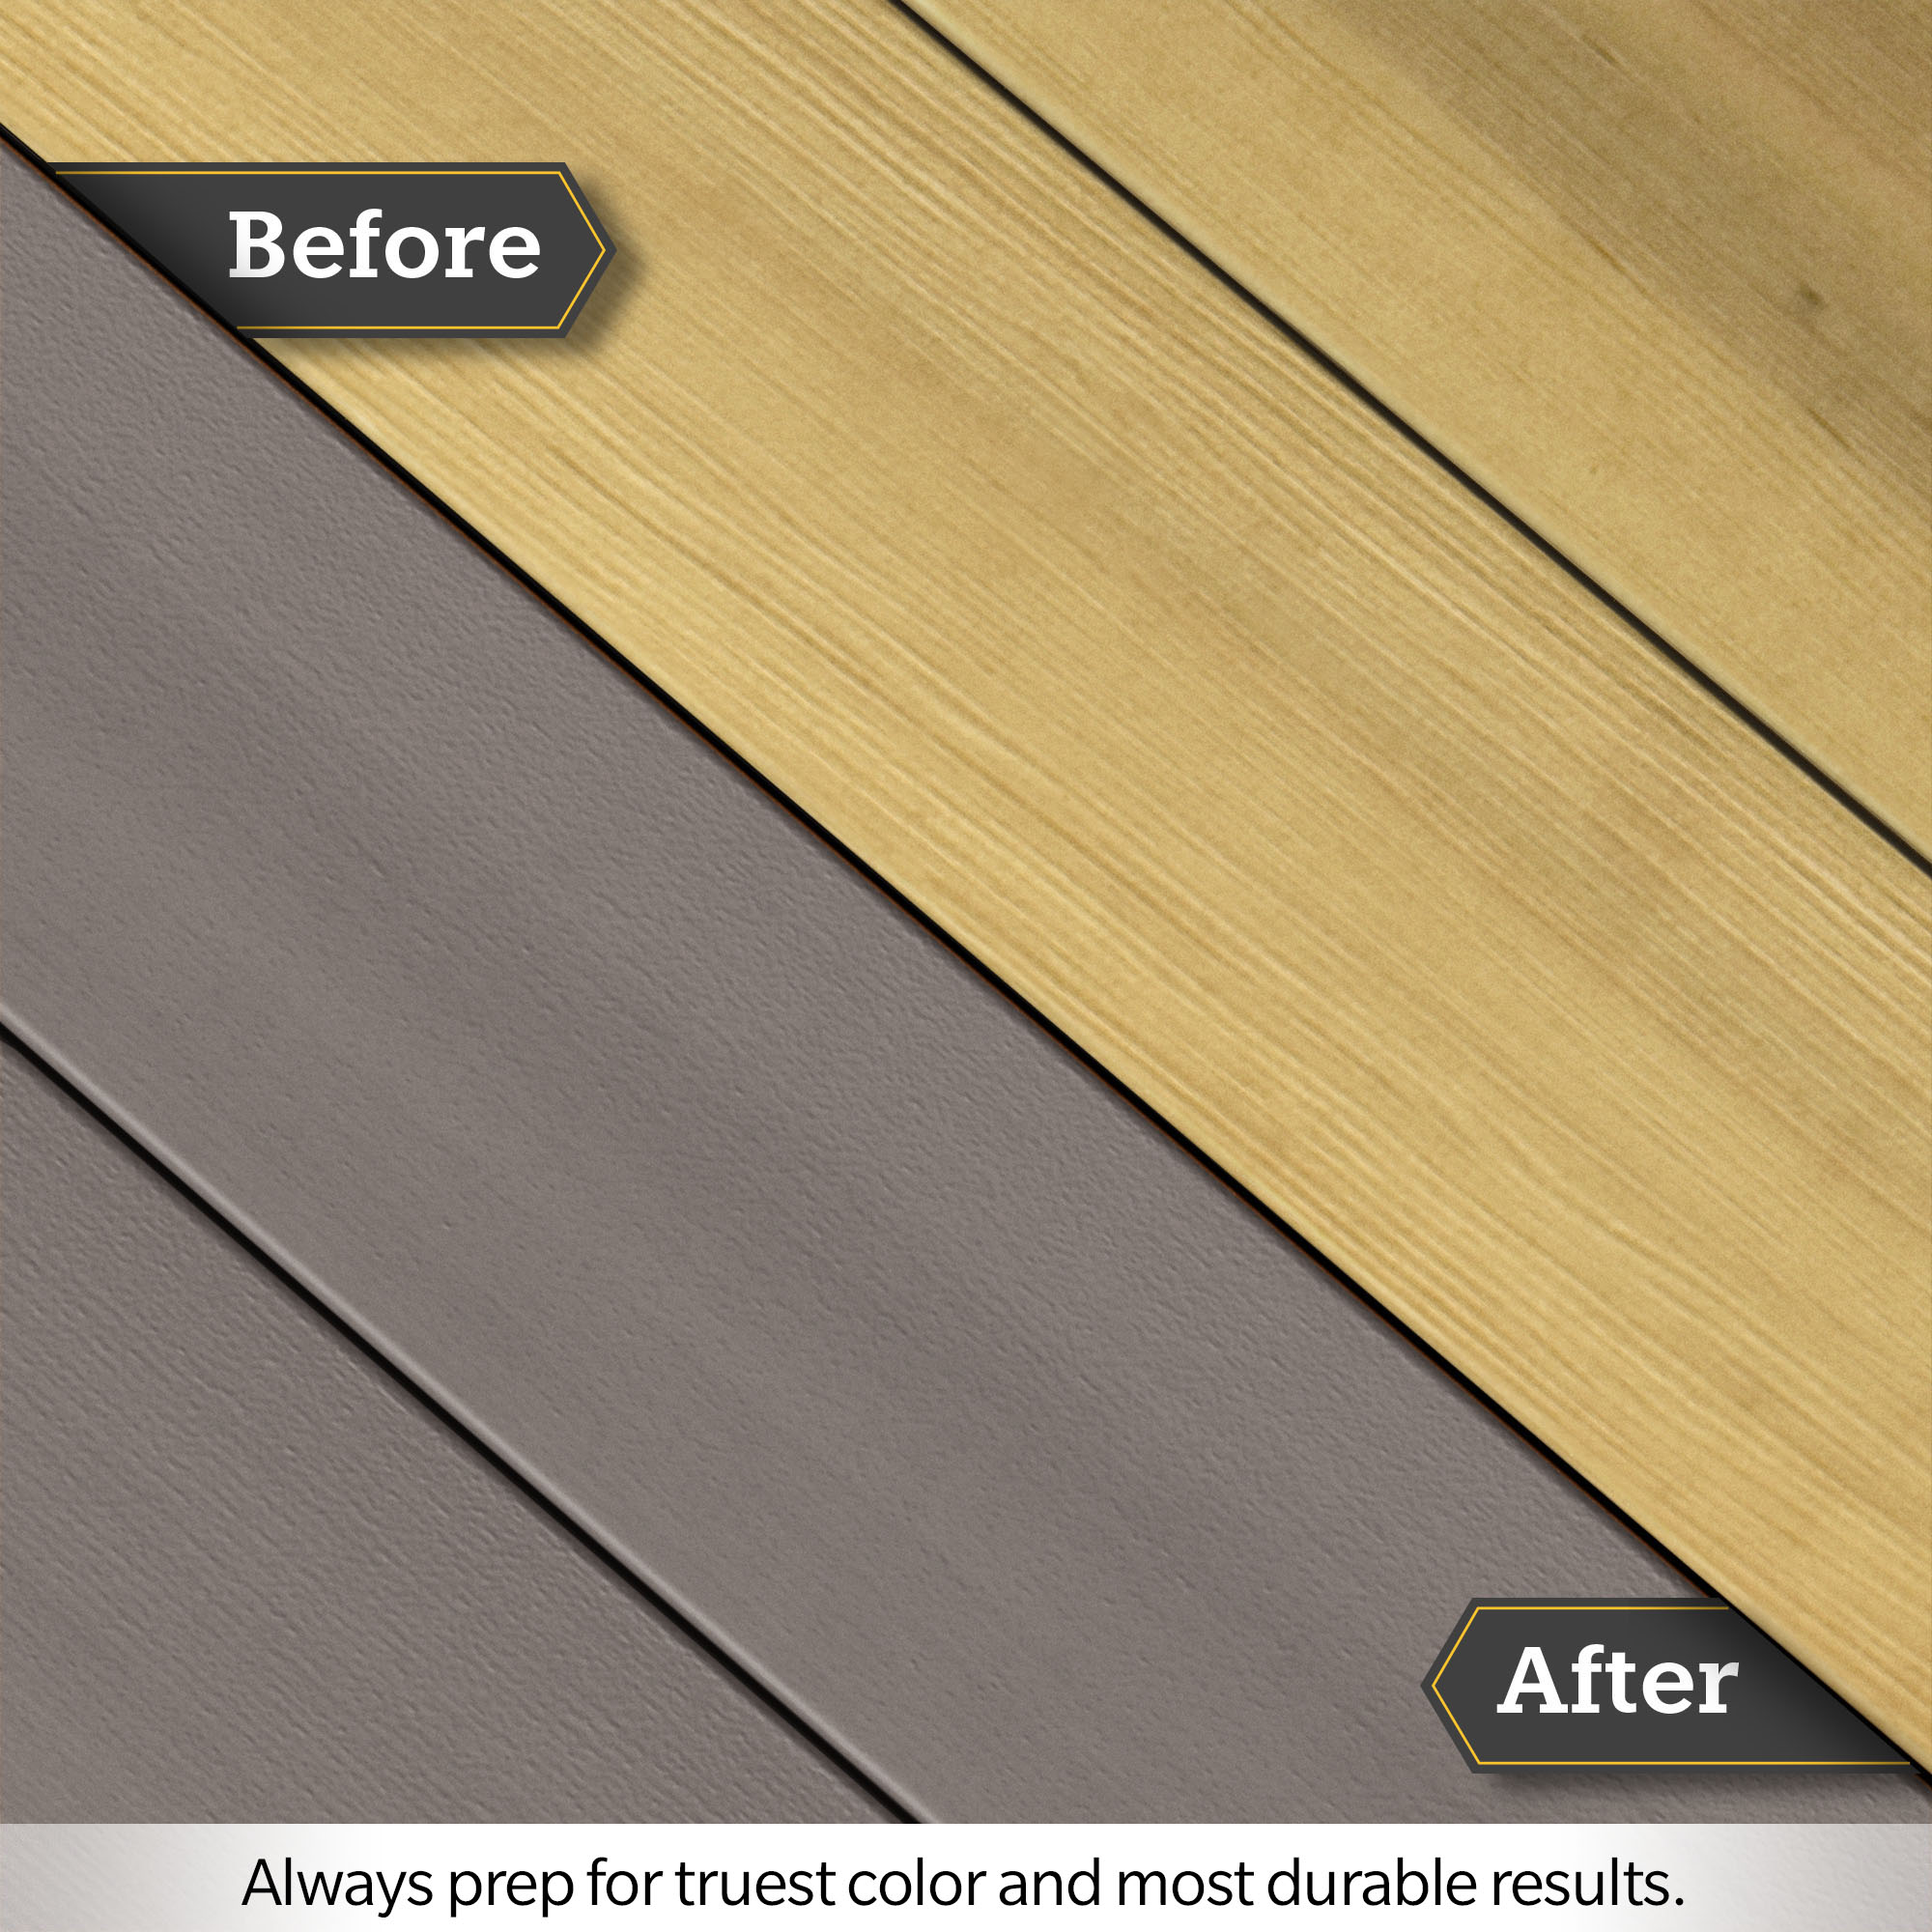 Exterior Wood Stain Colors - Gray Slate - Wood Stain Colors - Olympic